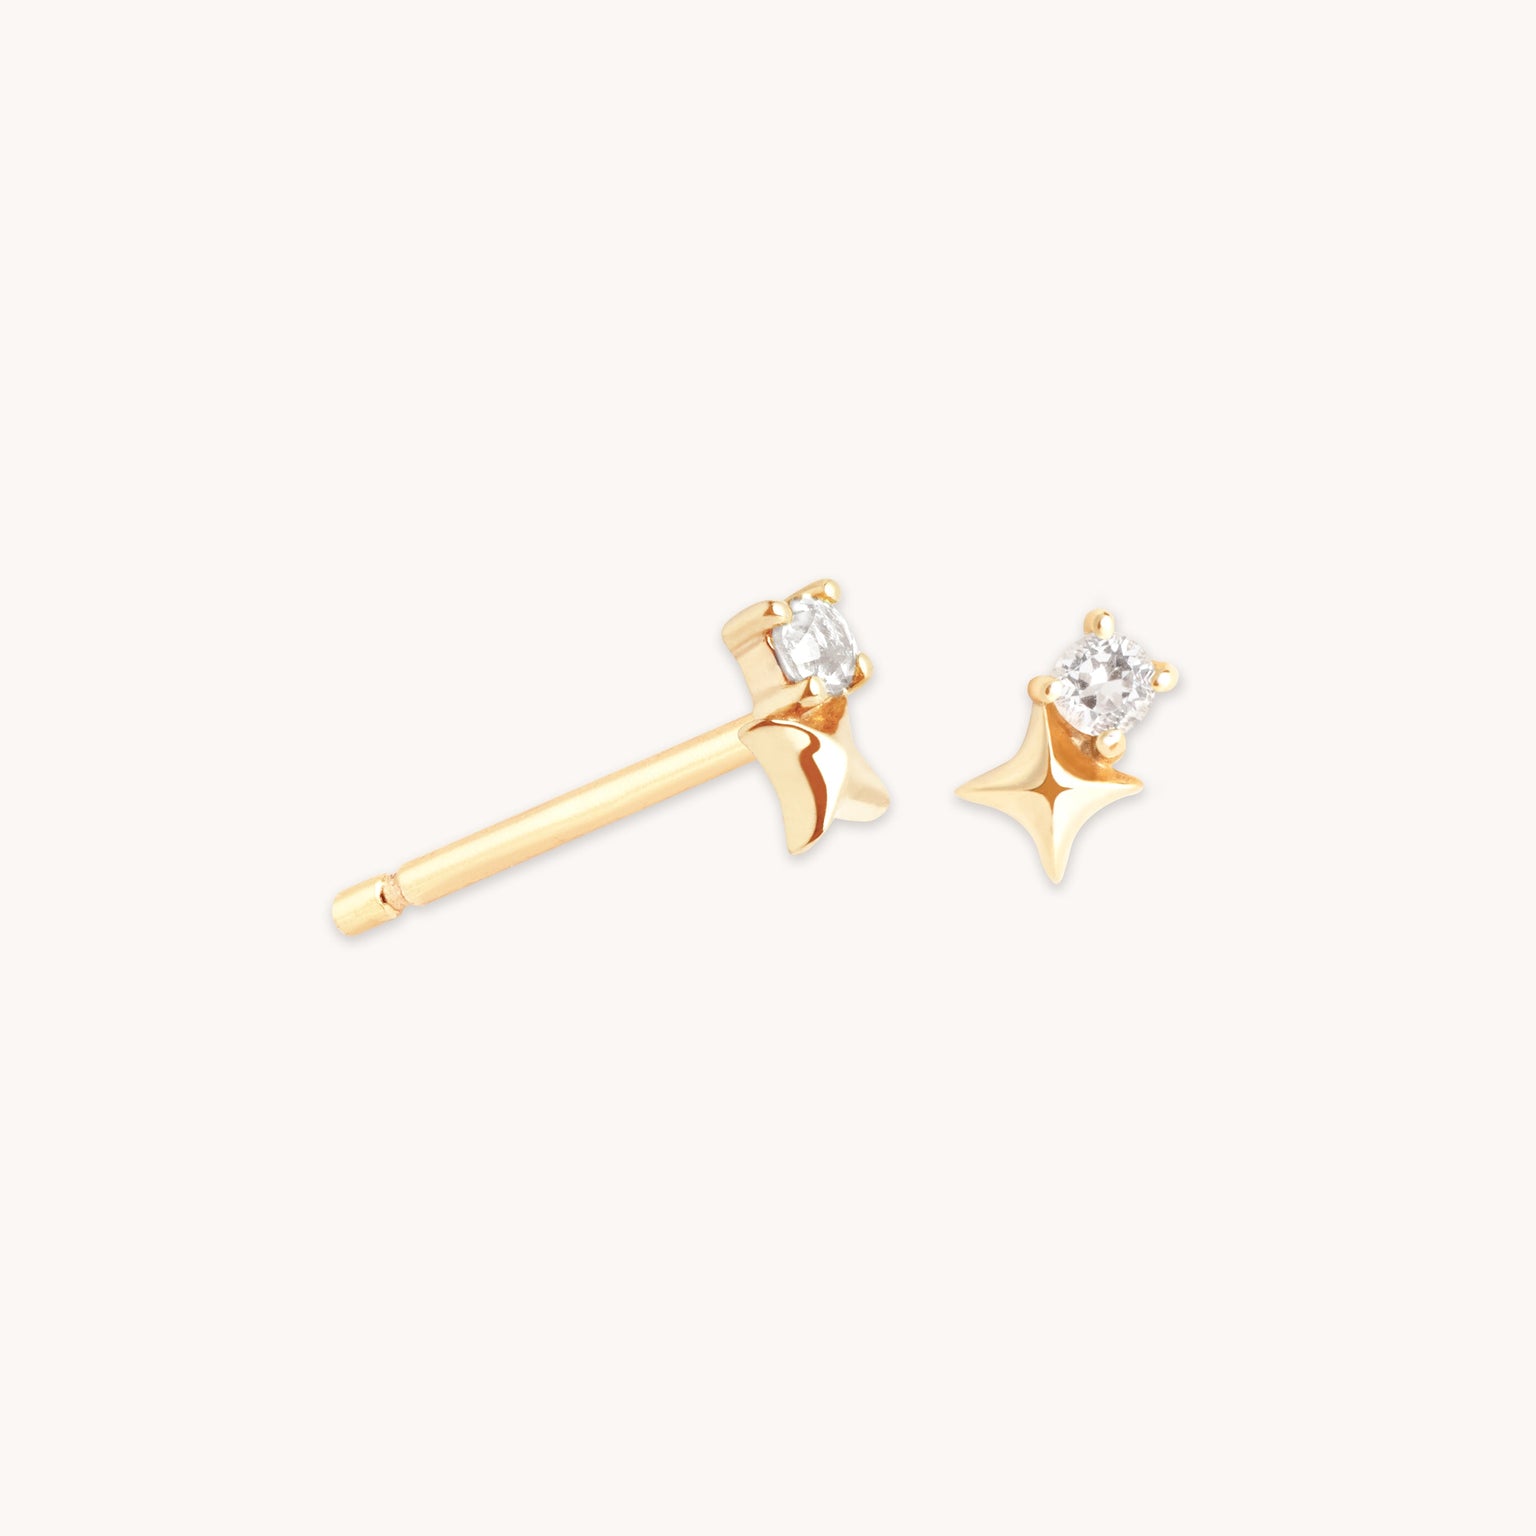 April Birthstone Earrings in Solid Gold